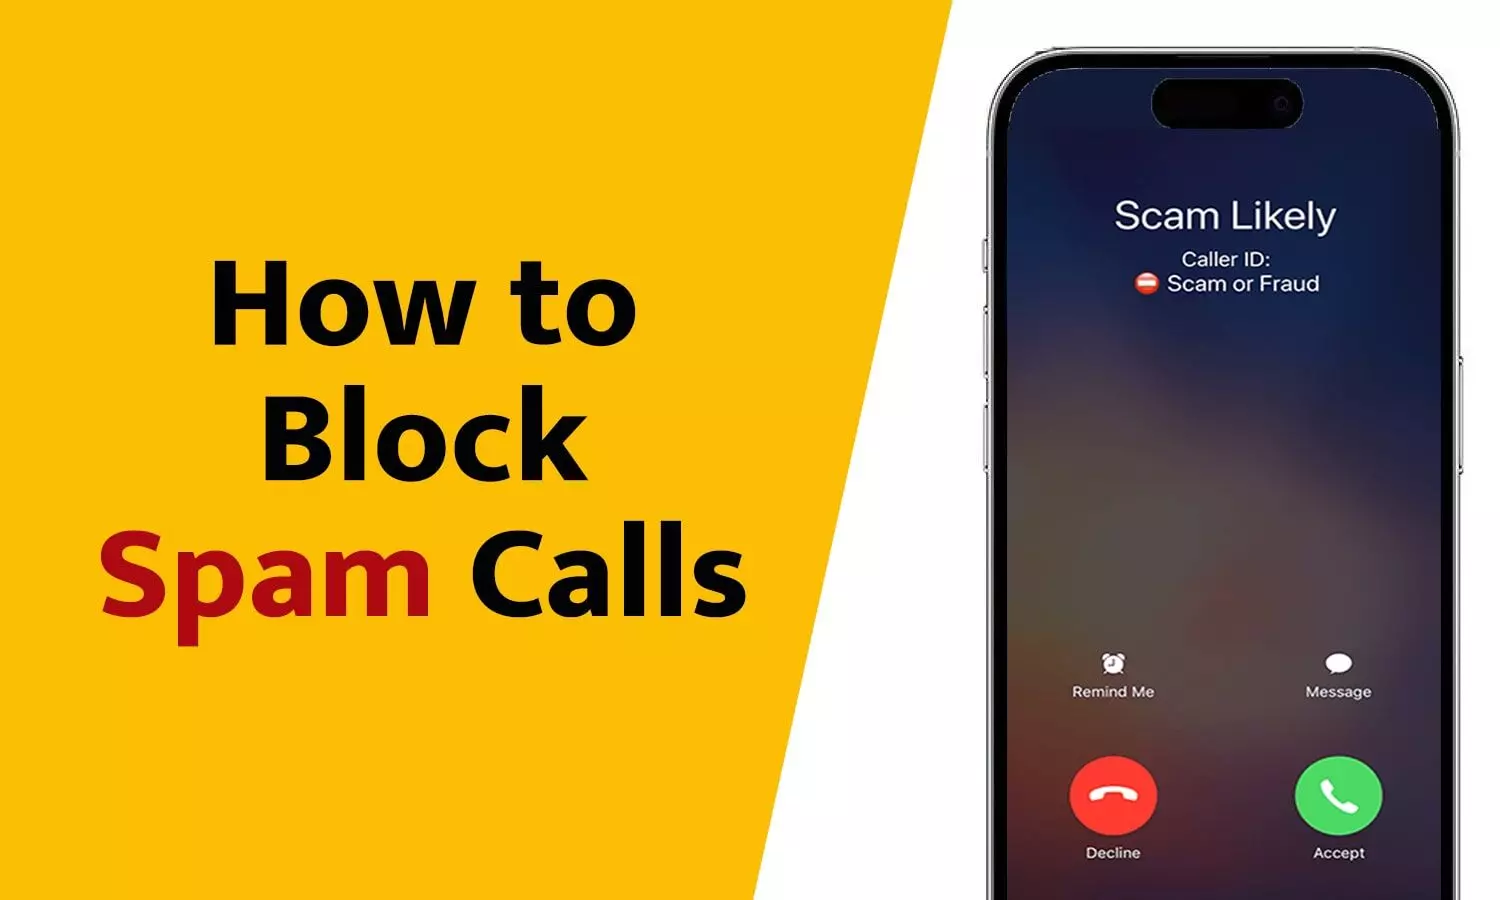 How to Block Spam Calls